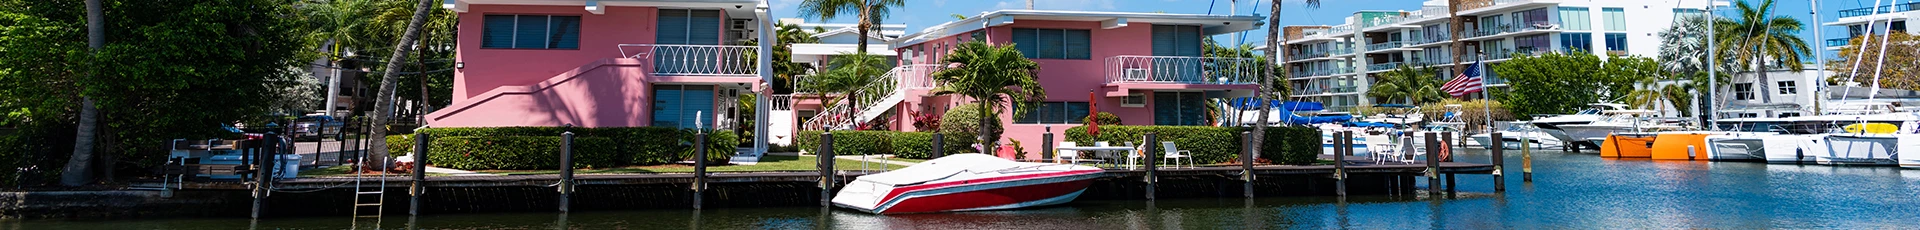 Boat Removal, Dismantle and Disposal in Micco Florida